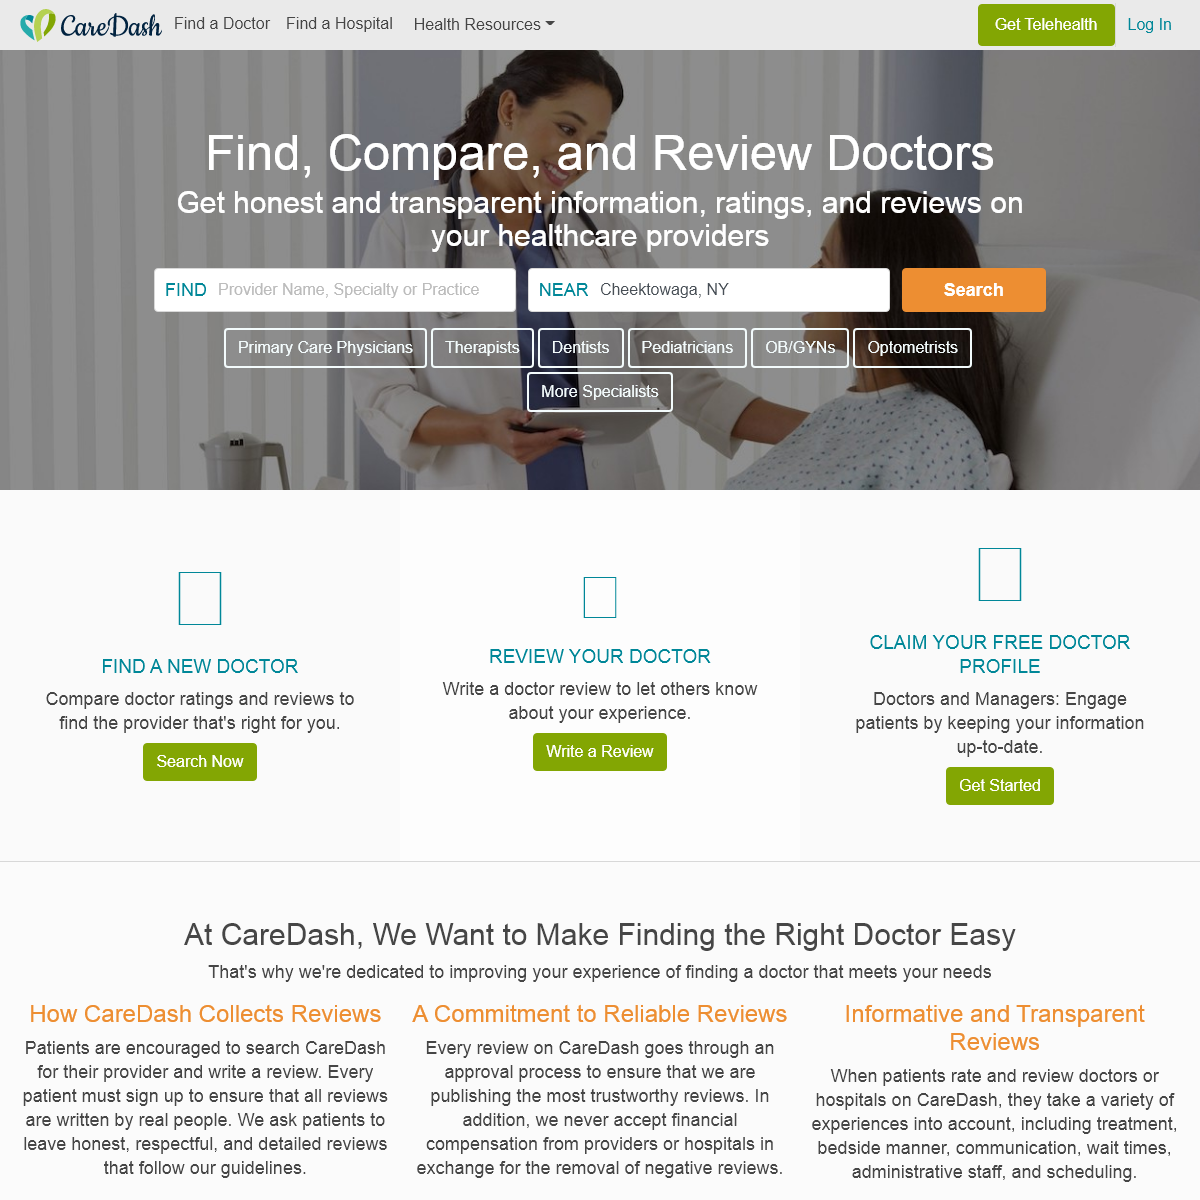 CareDash - Read Doctor Reviews, Compare Doctors & Book Appointments